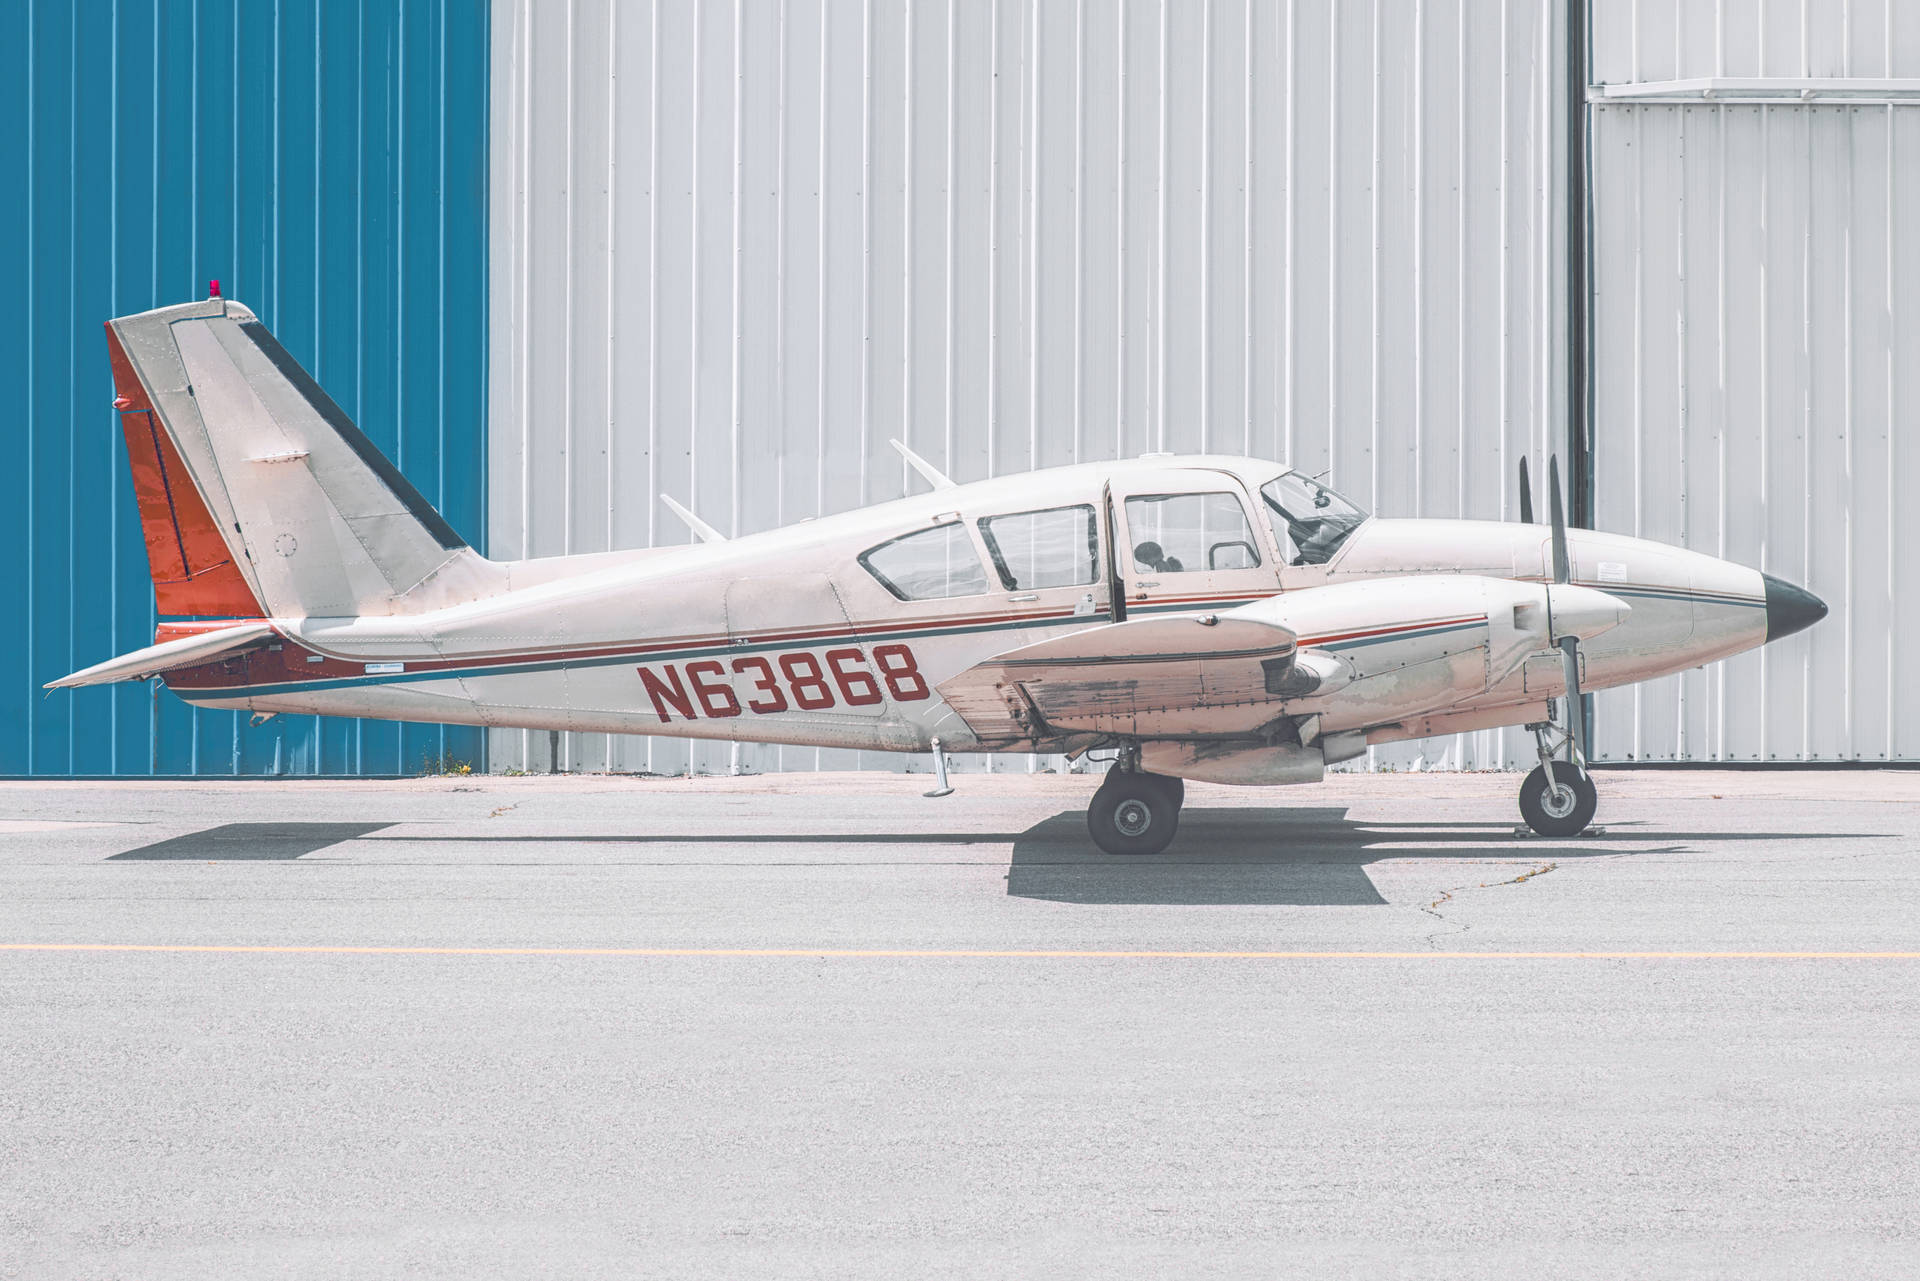 Small Plane On The Hangar Background